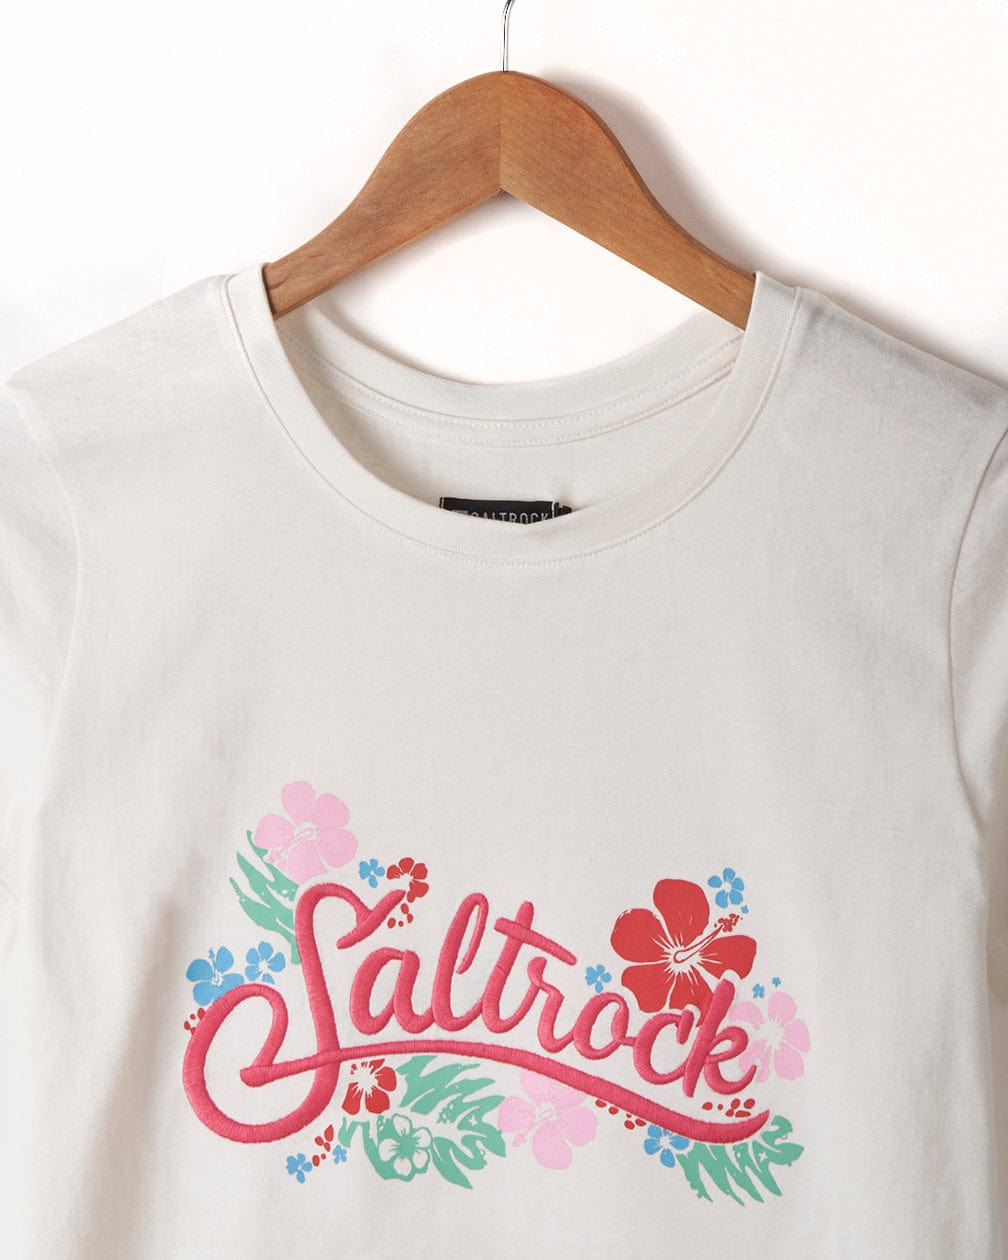 A Tropic - Womens T-Shirt - White with the branding "Saltrock" embroidered on it.